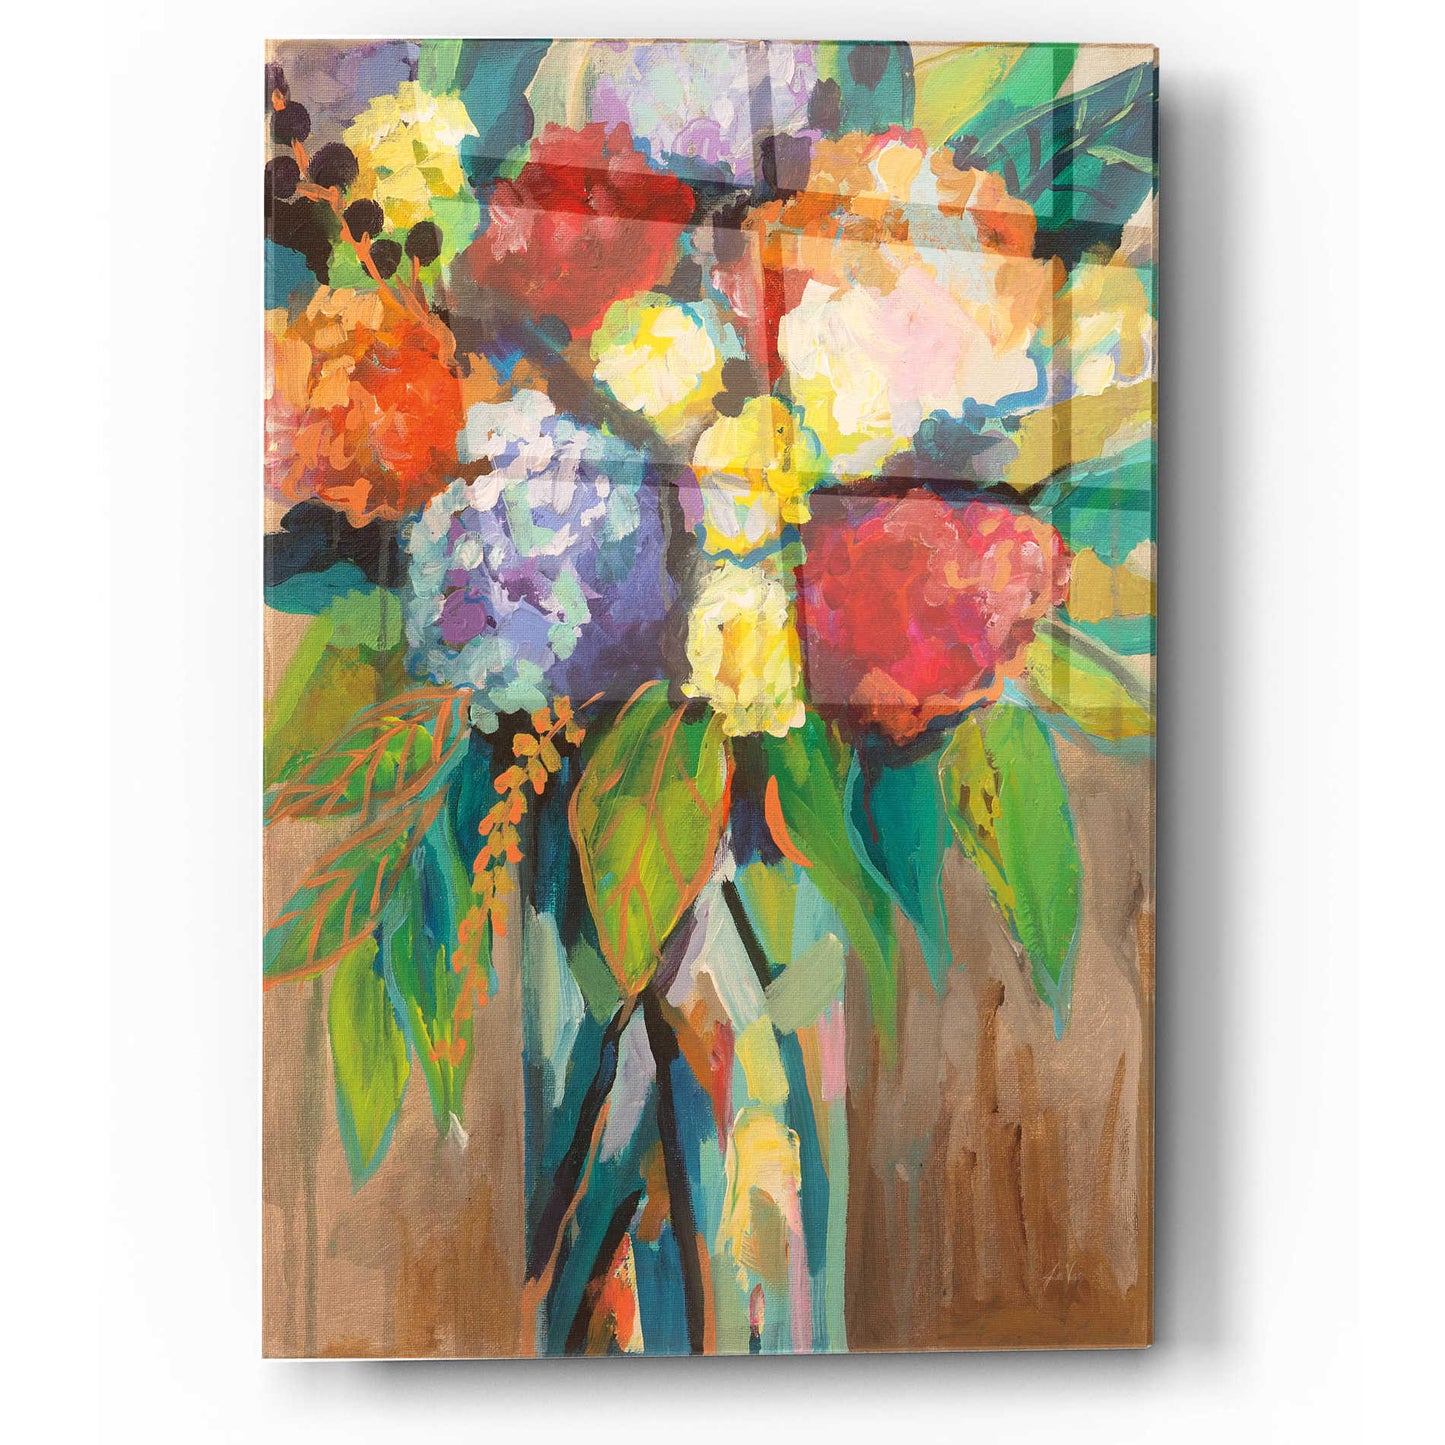 Epic Art 'Colorful' by Jeanette Vertentes, Acrylic Glass Wall Art,12x16